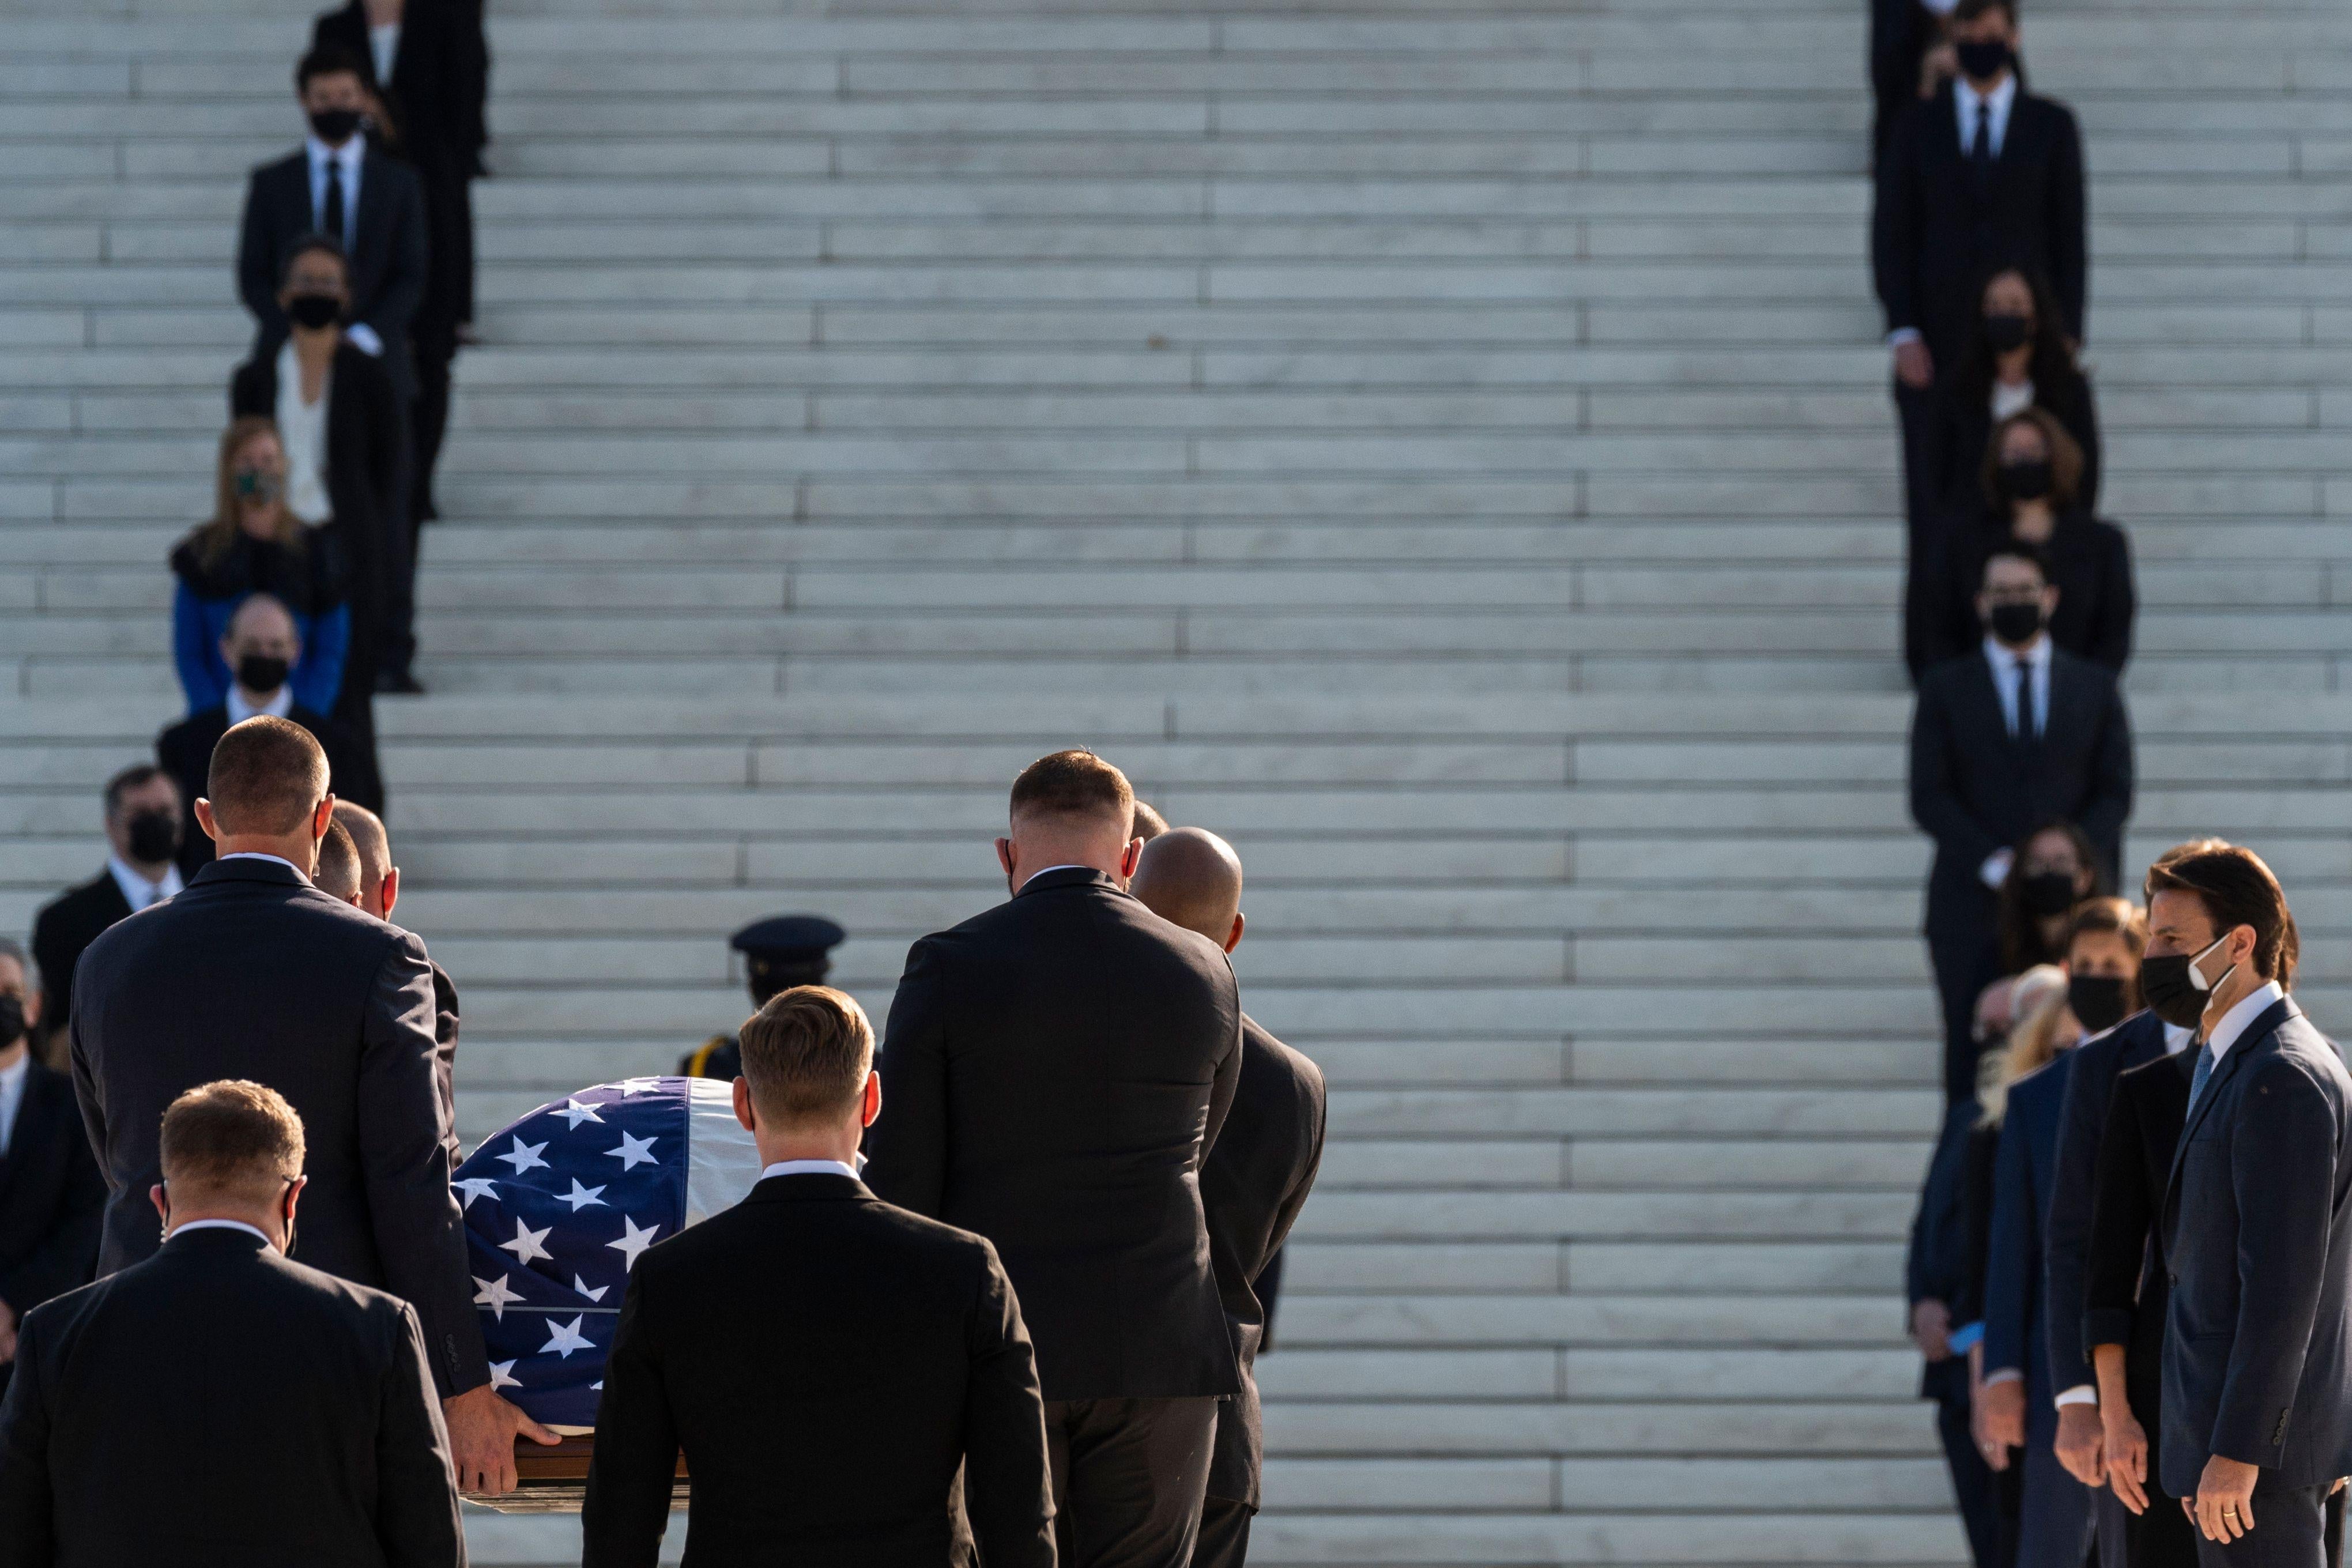 People in suits stand on the steps of the Supreme Court as a casket with an American flag is carried up the steps.